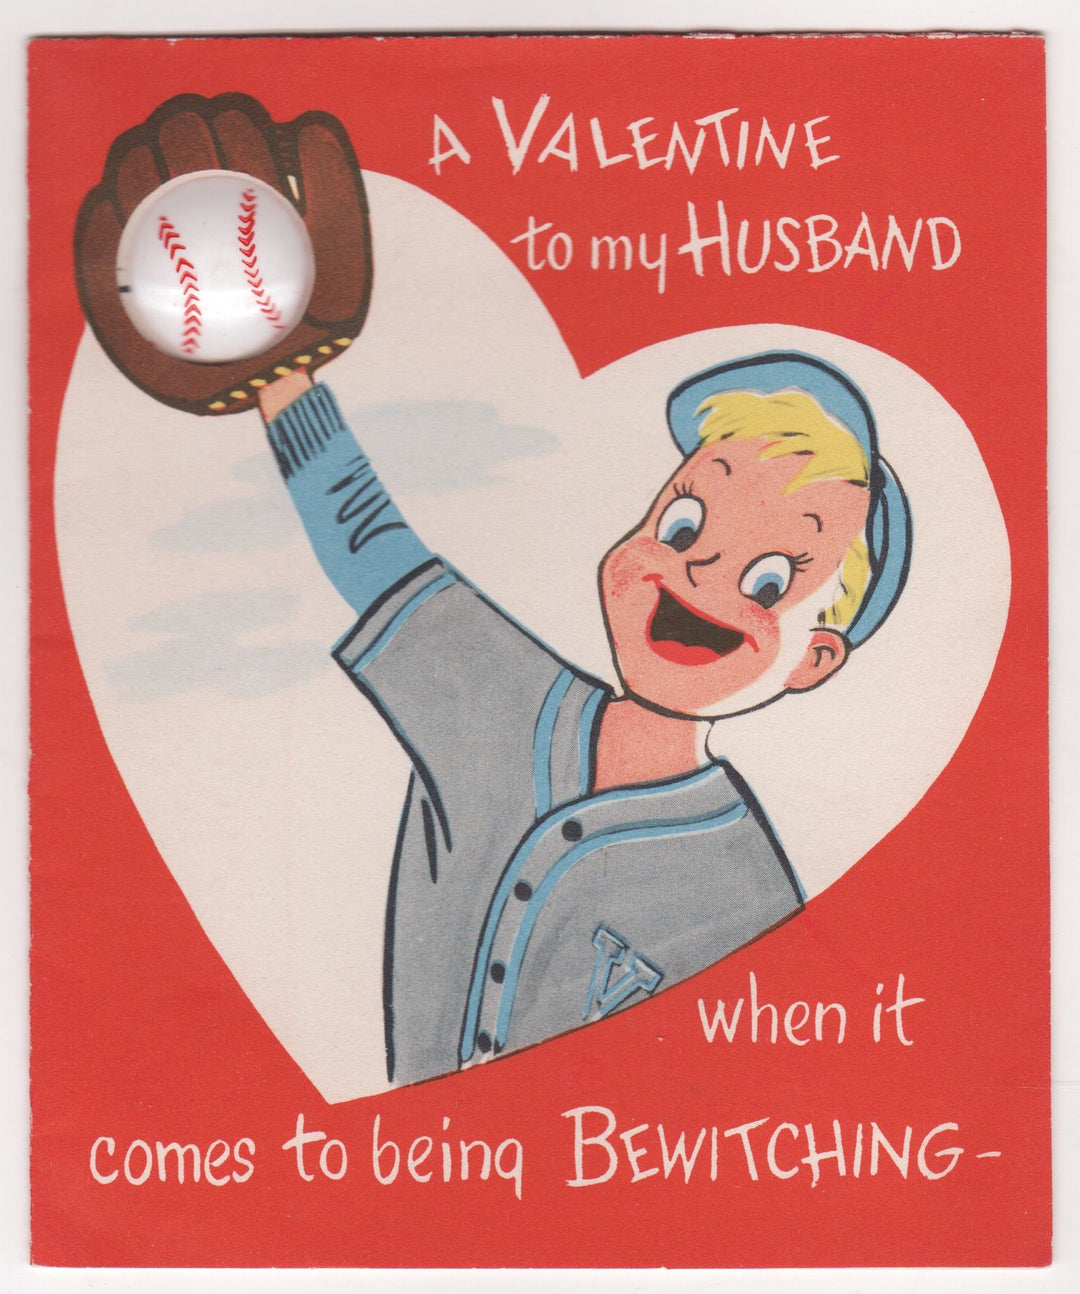 Bewitching Baseball Player Cute Vintage Valentine's Day Card